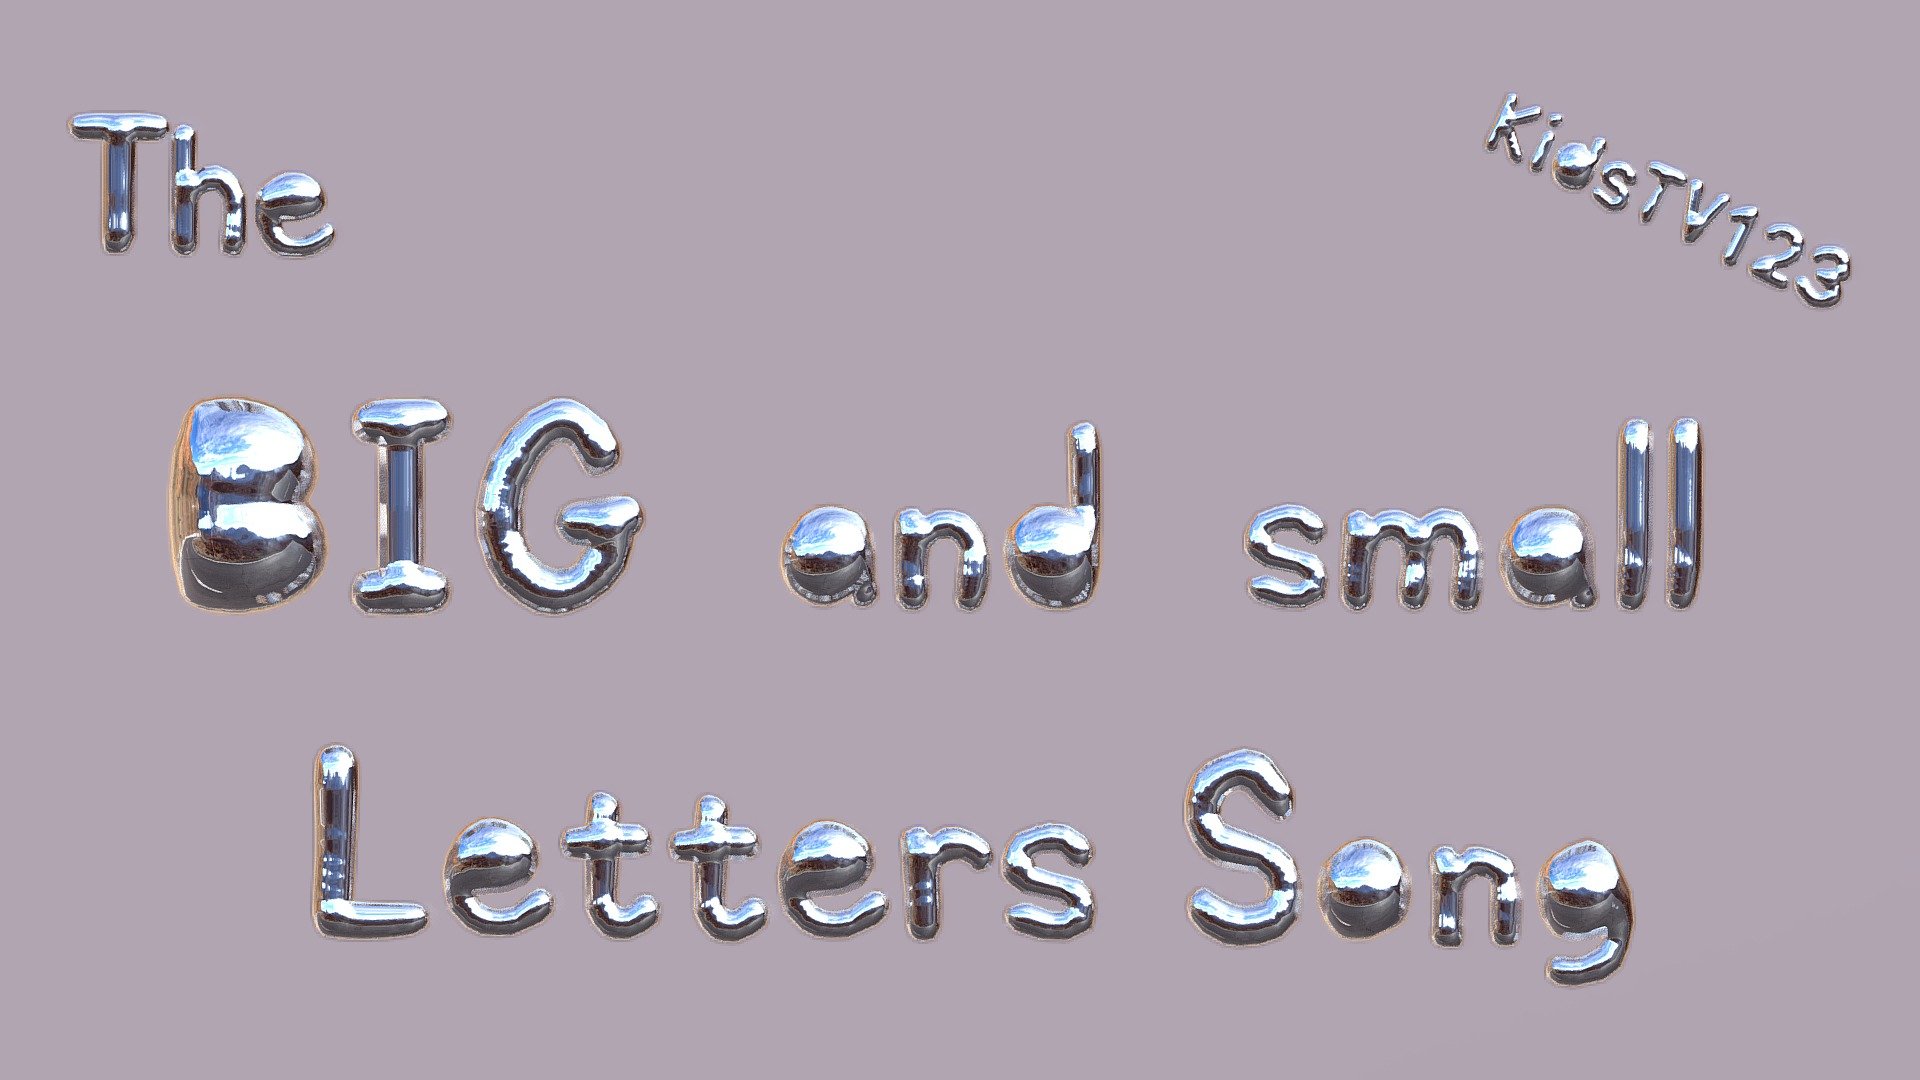 The Big And Small Letters Song